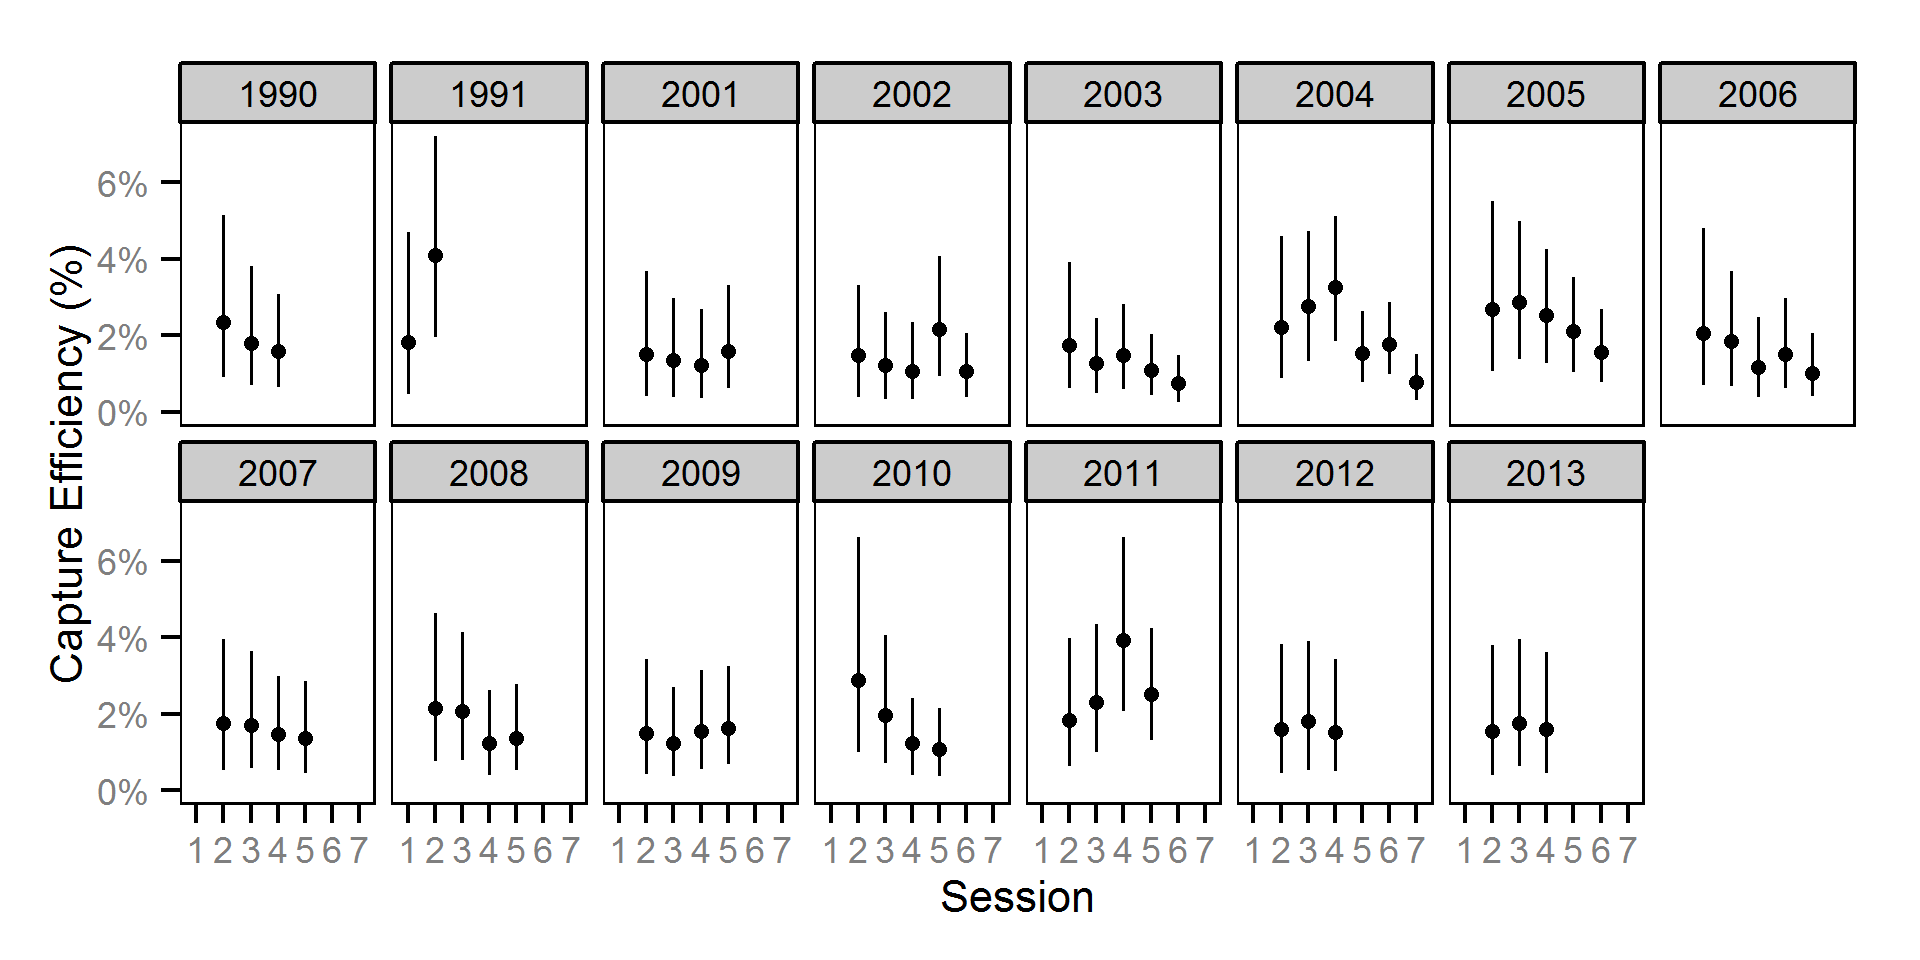 figures/efficiency/Adult WP/session-year.png